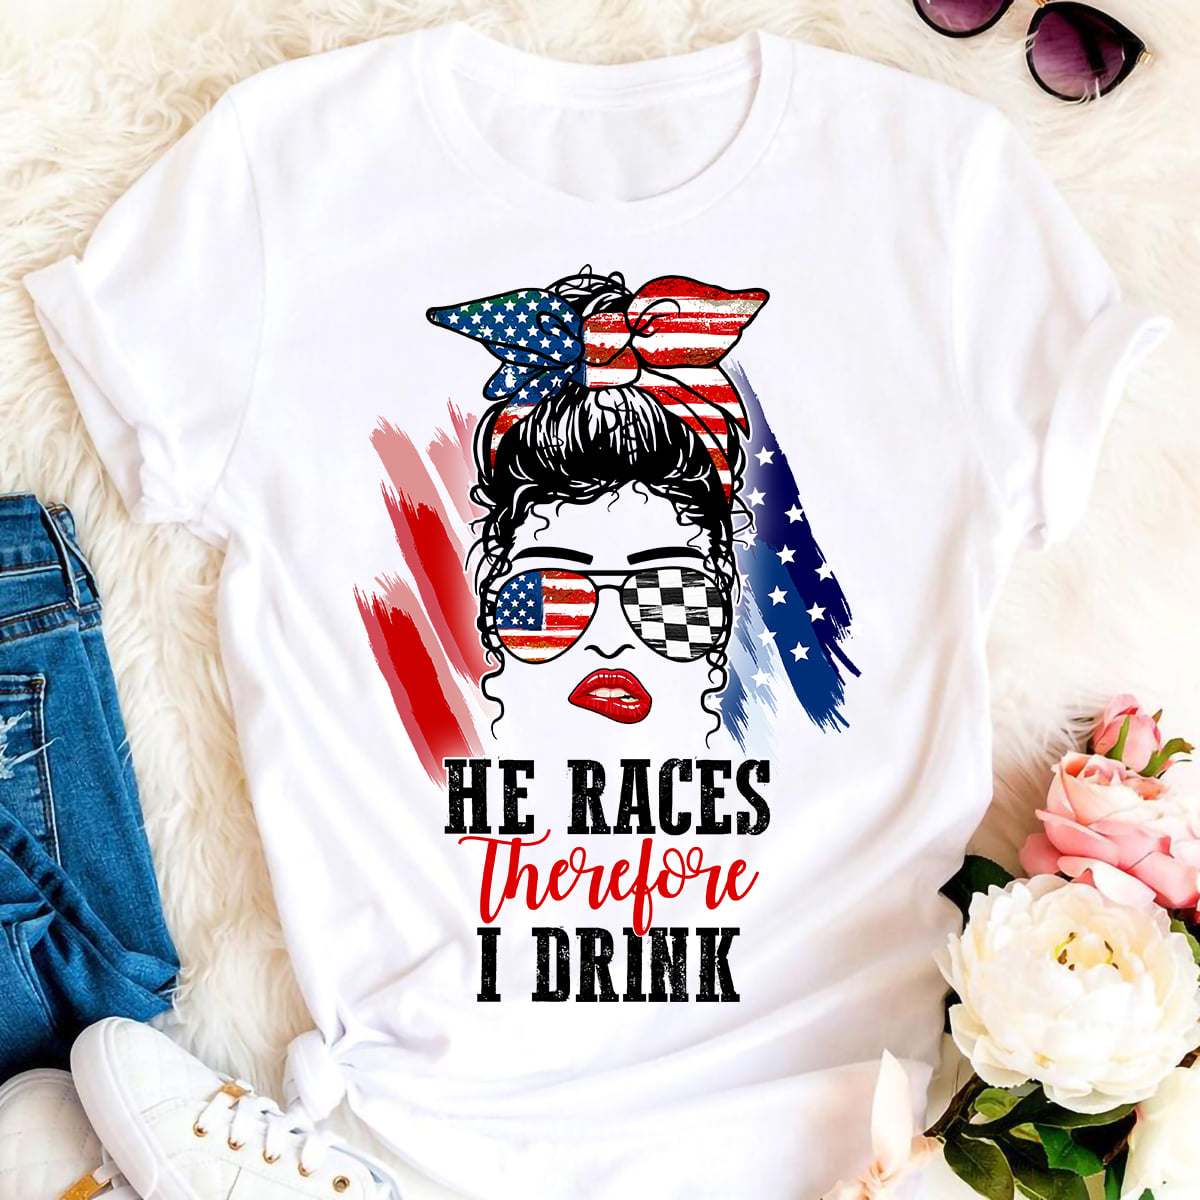 Women Race America Flag - He race therefore i drink